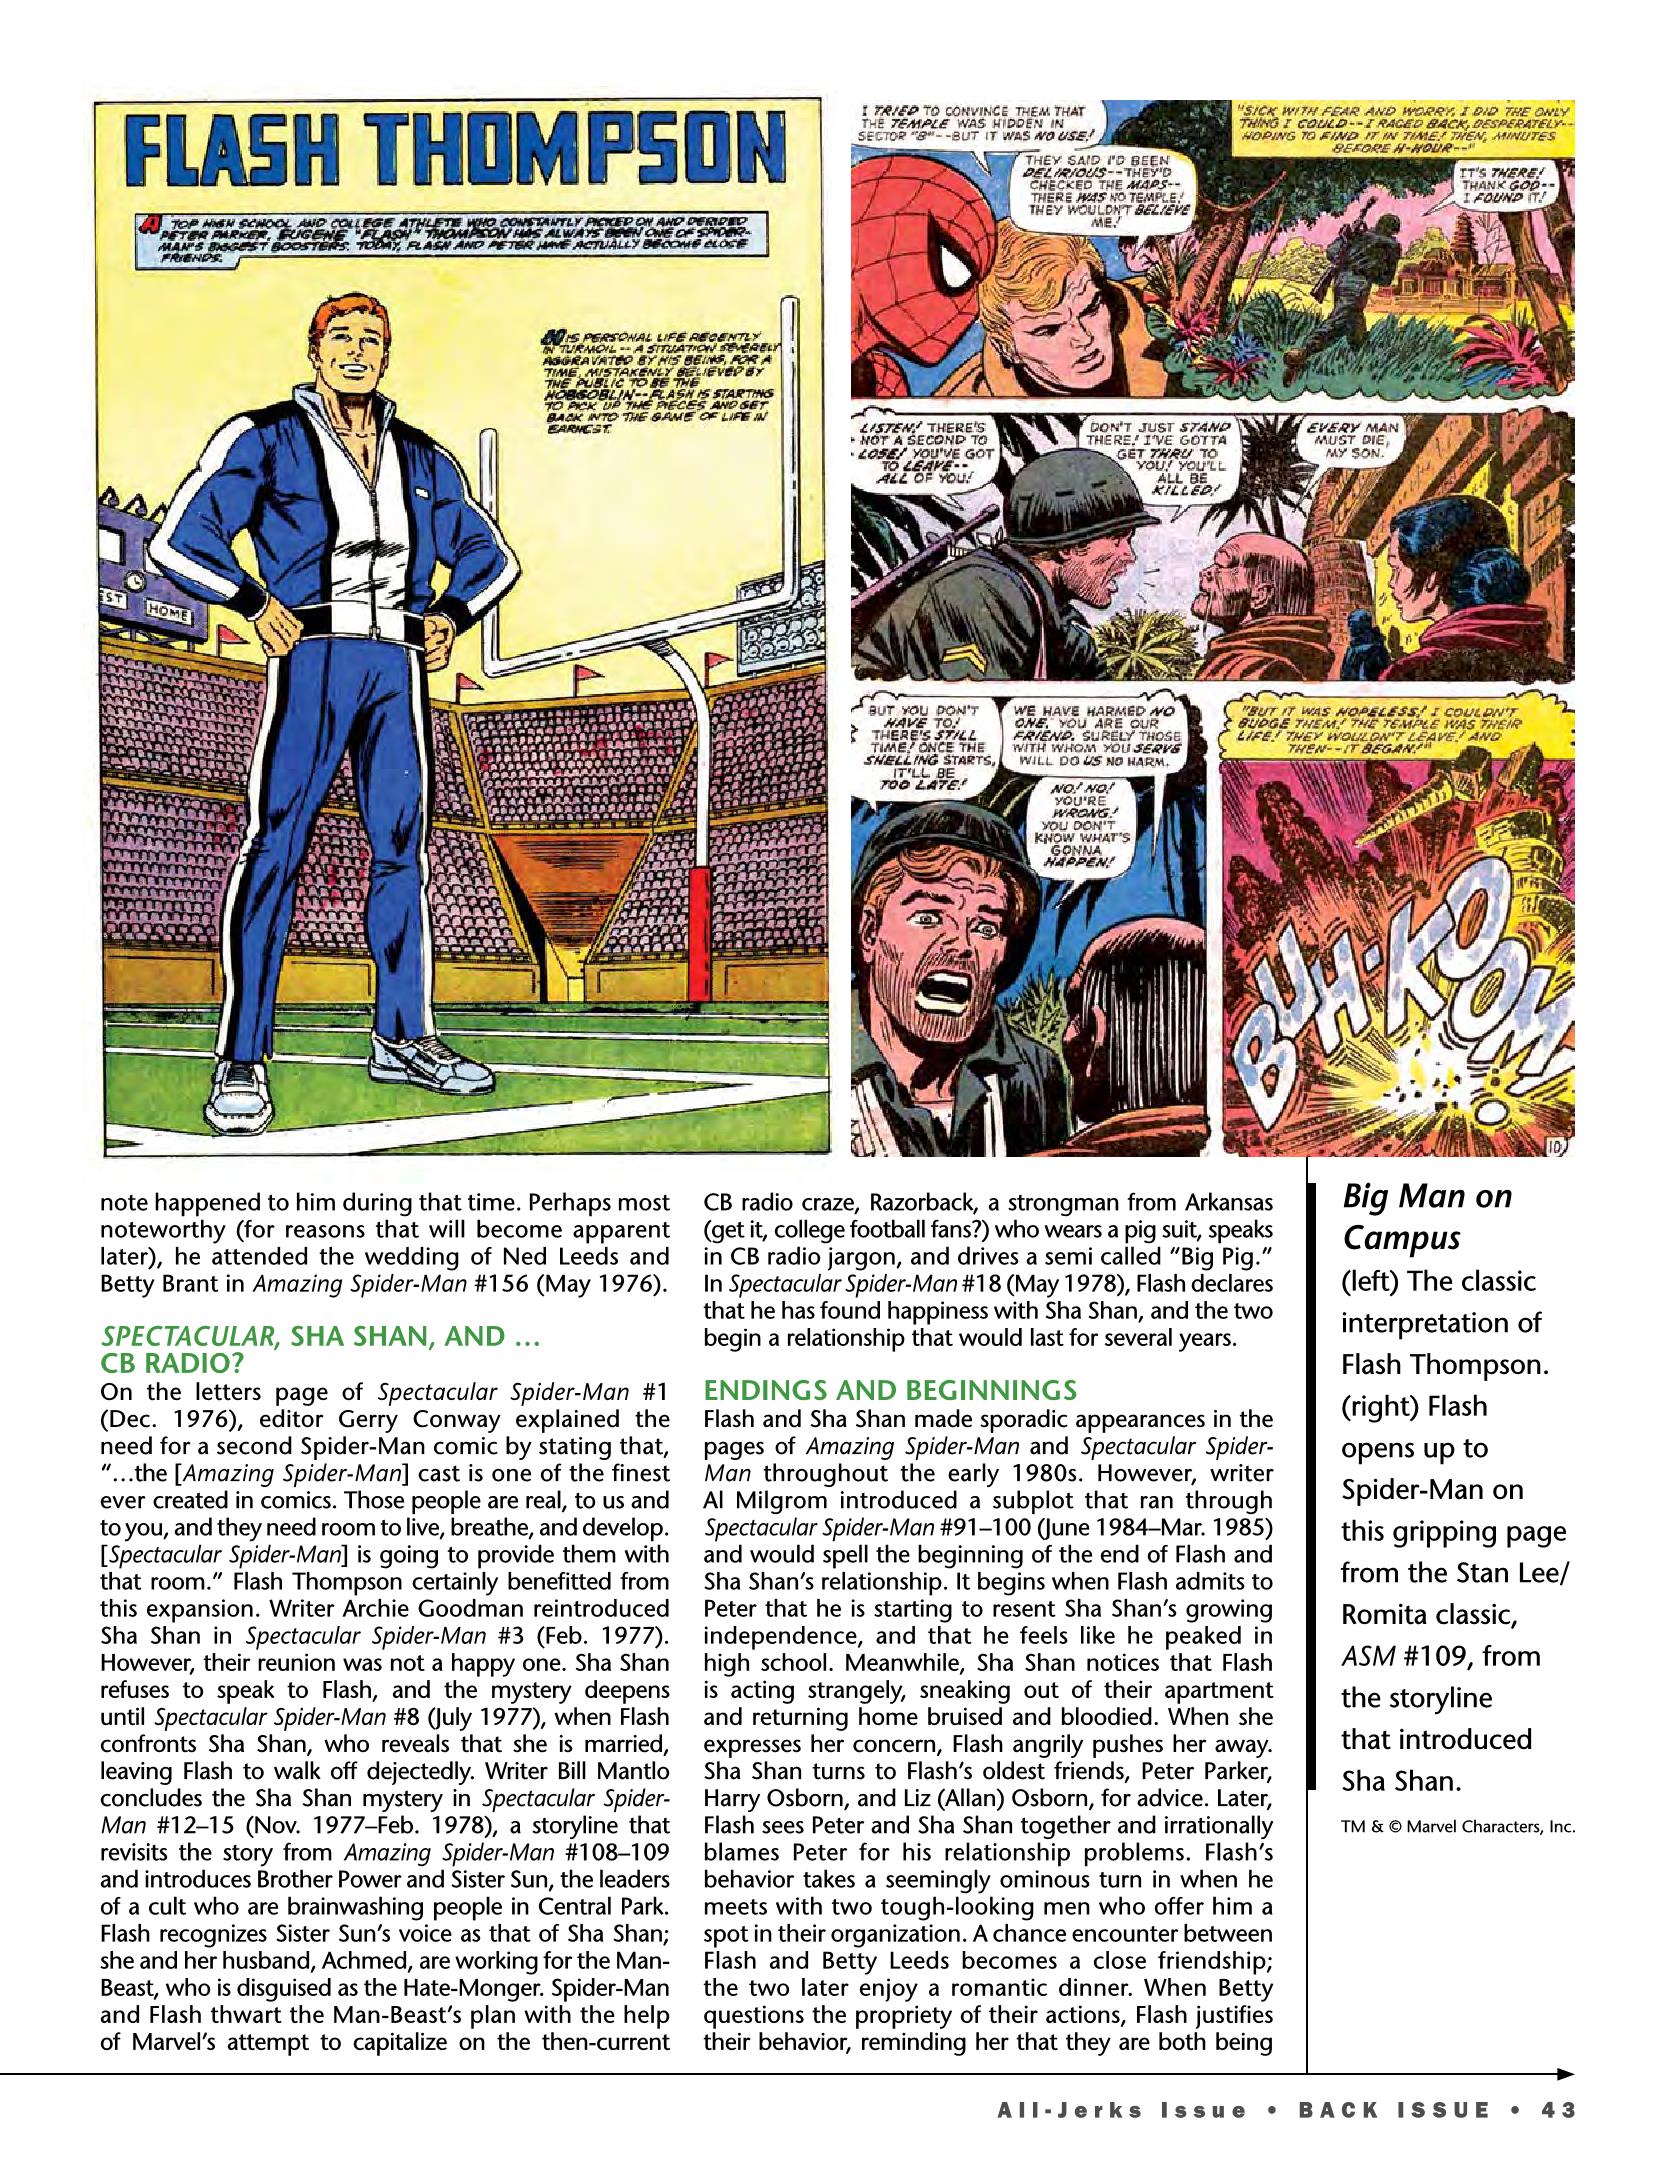 Read online Back Issue comic -  Issue #91 - 40